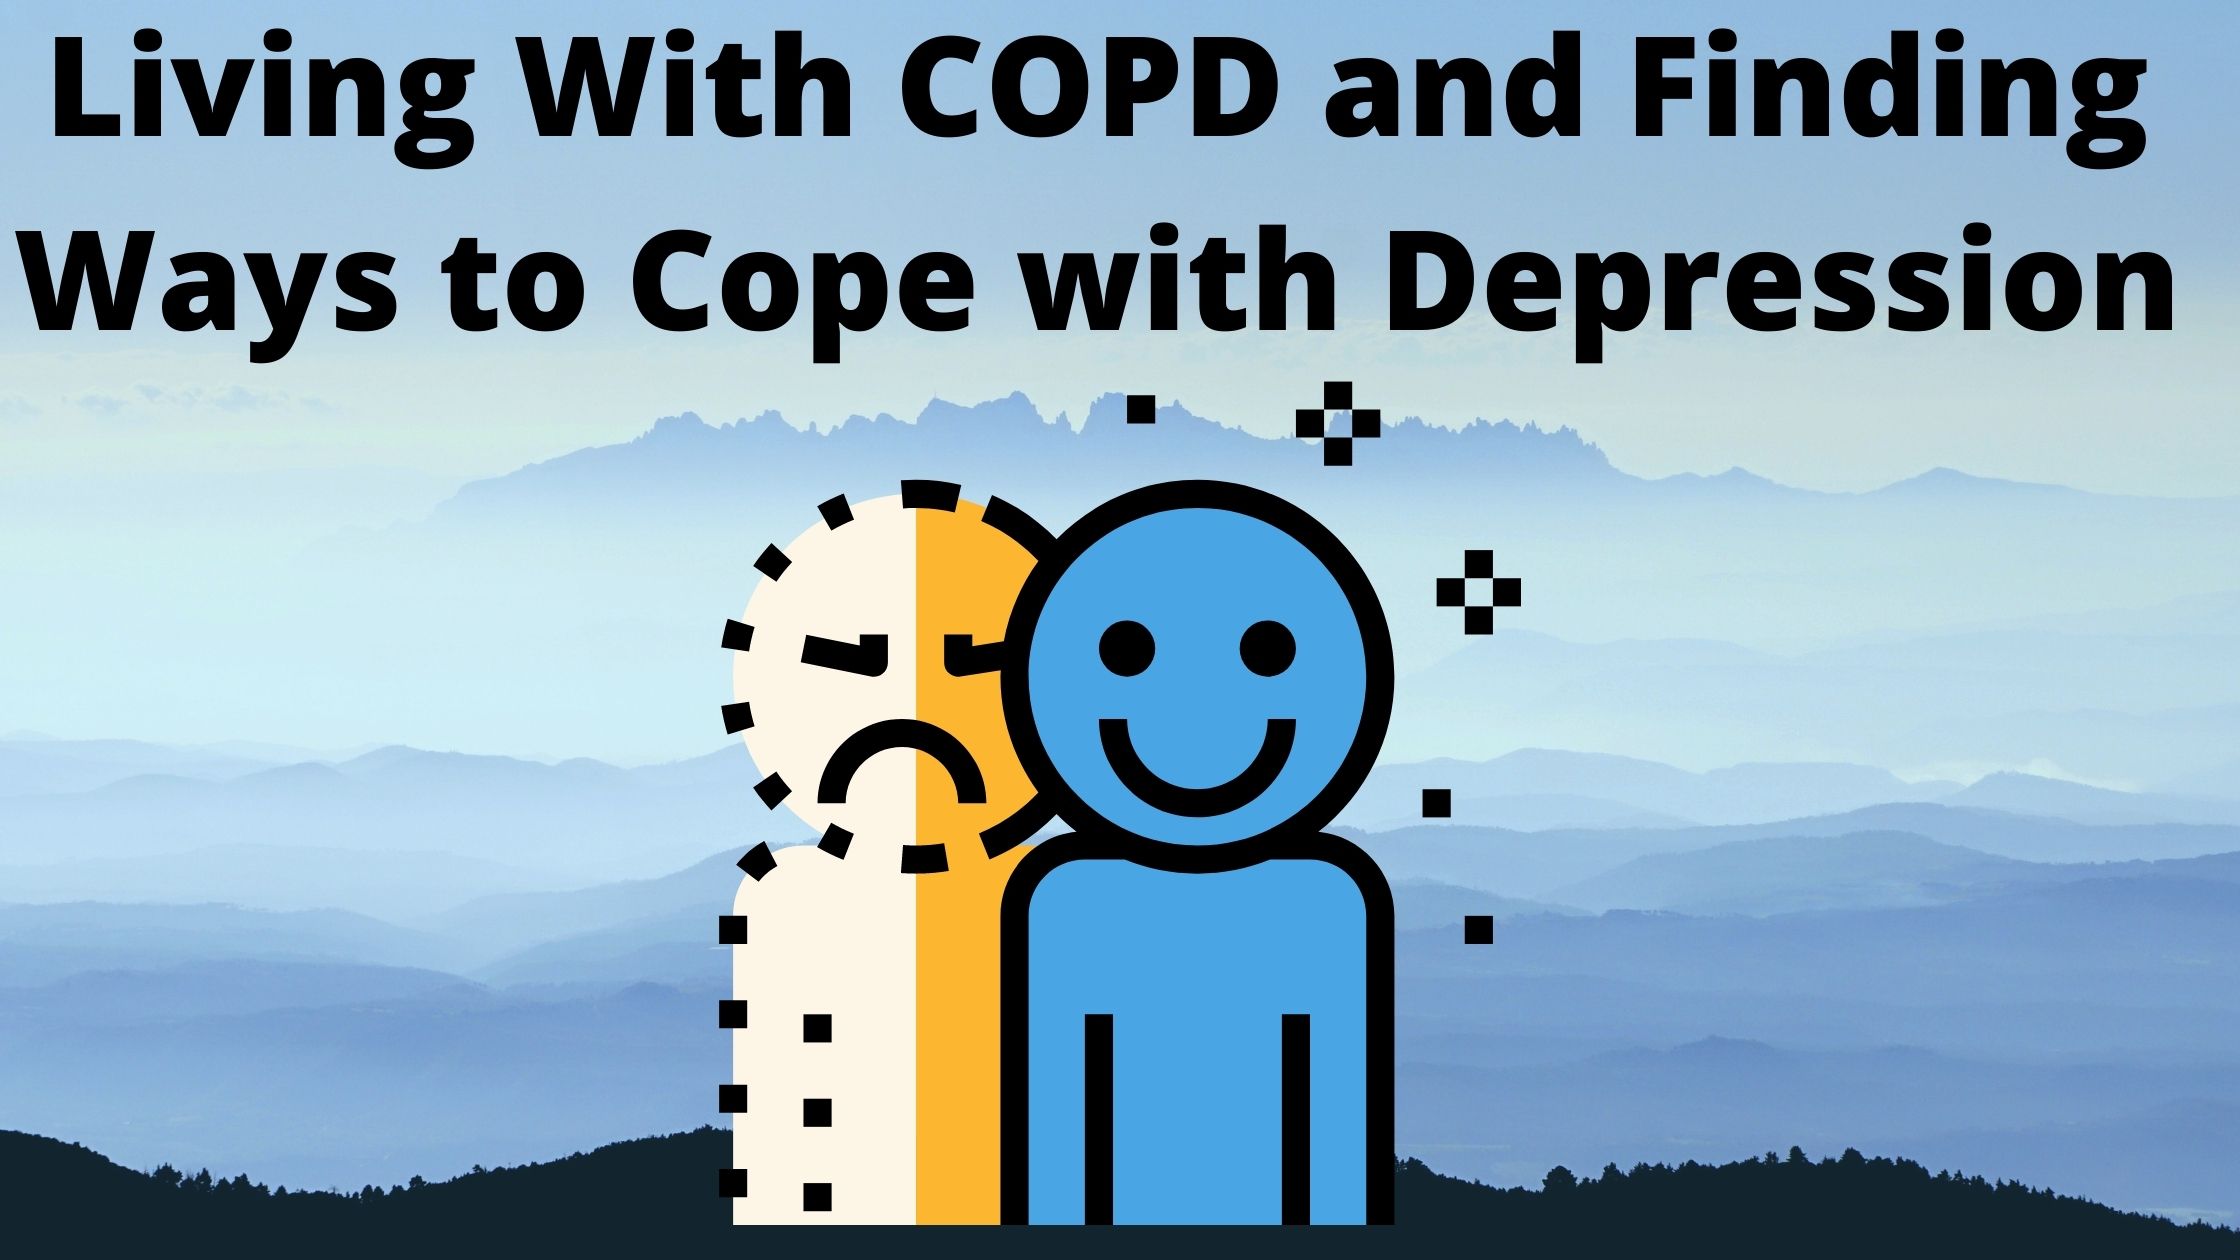 Living with COPD is more than just finding treatments to breath easies and reduce respiratory systems. Treating COPD also means dealing with your mental health.